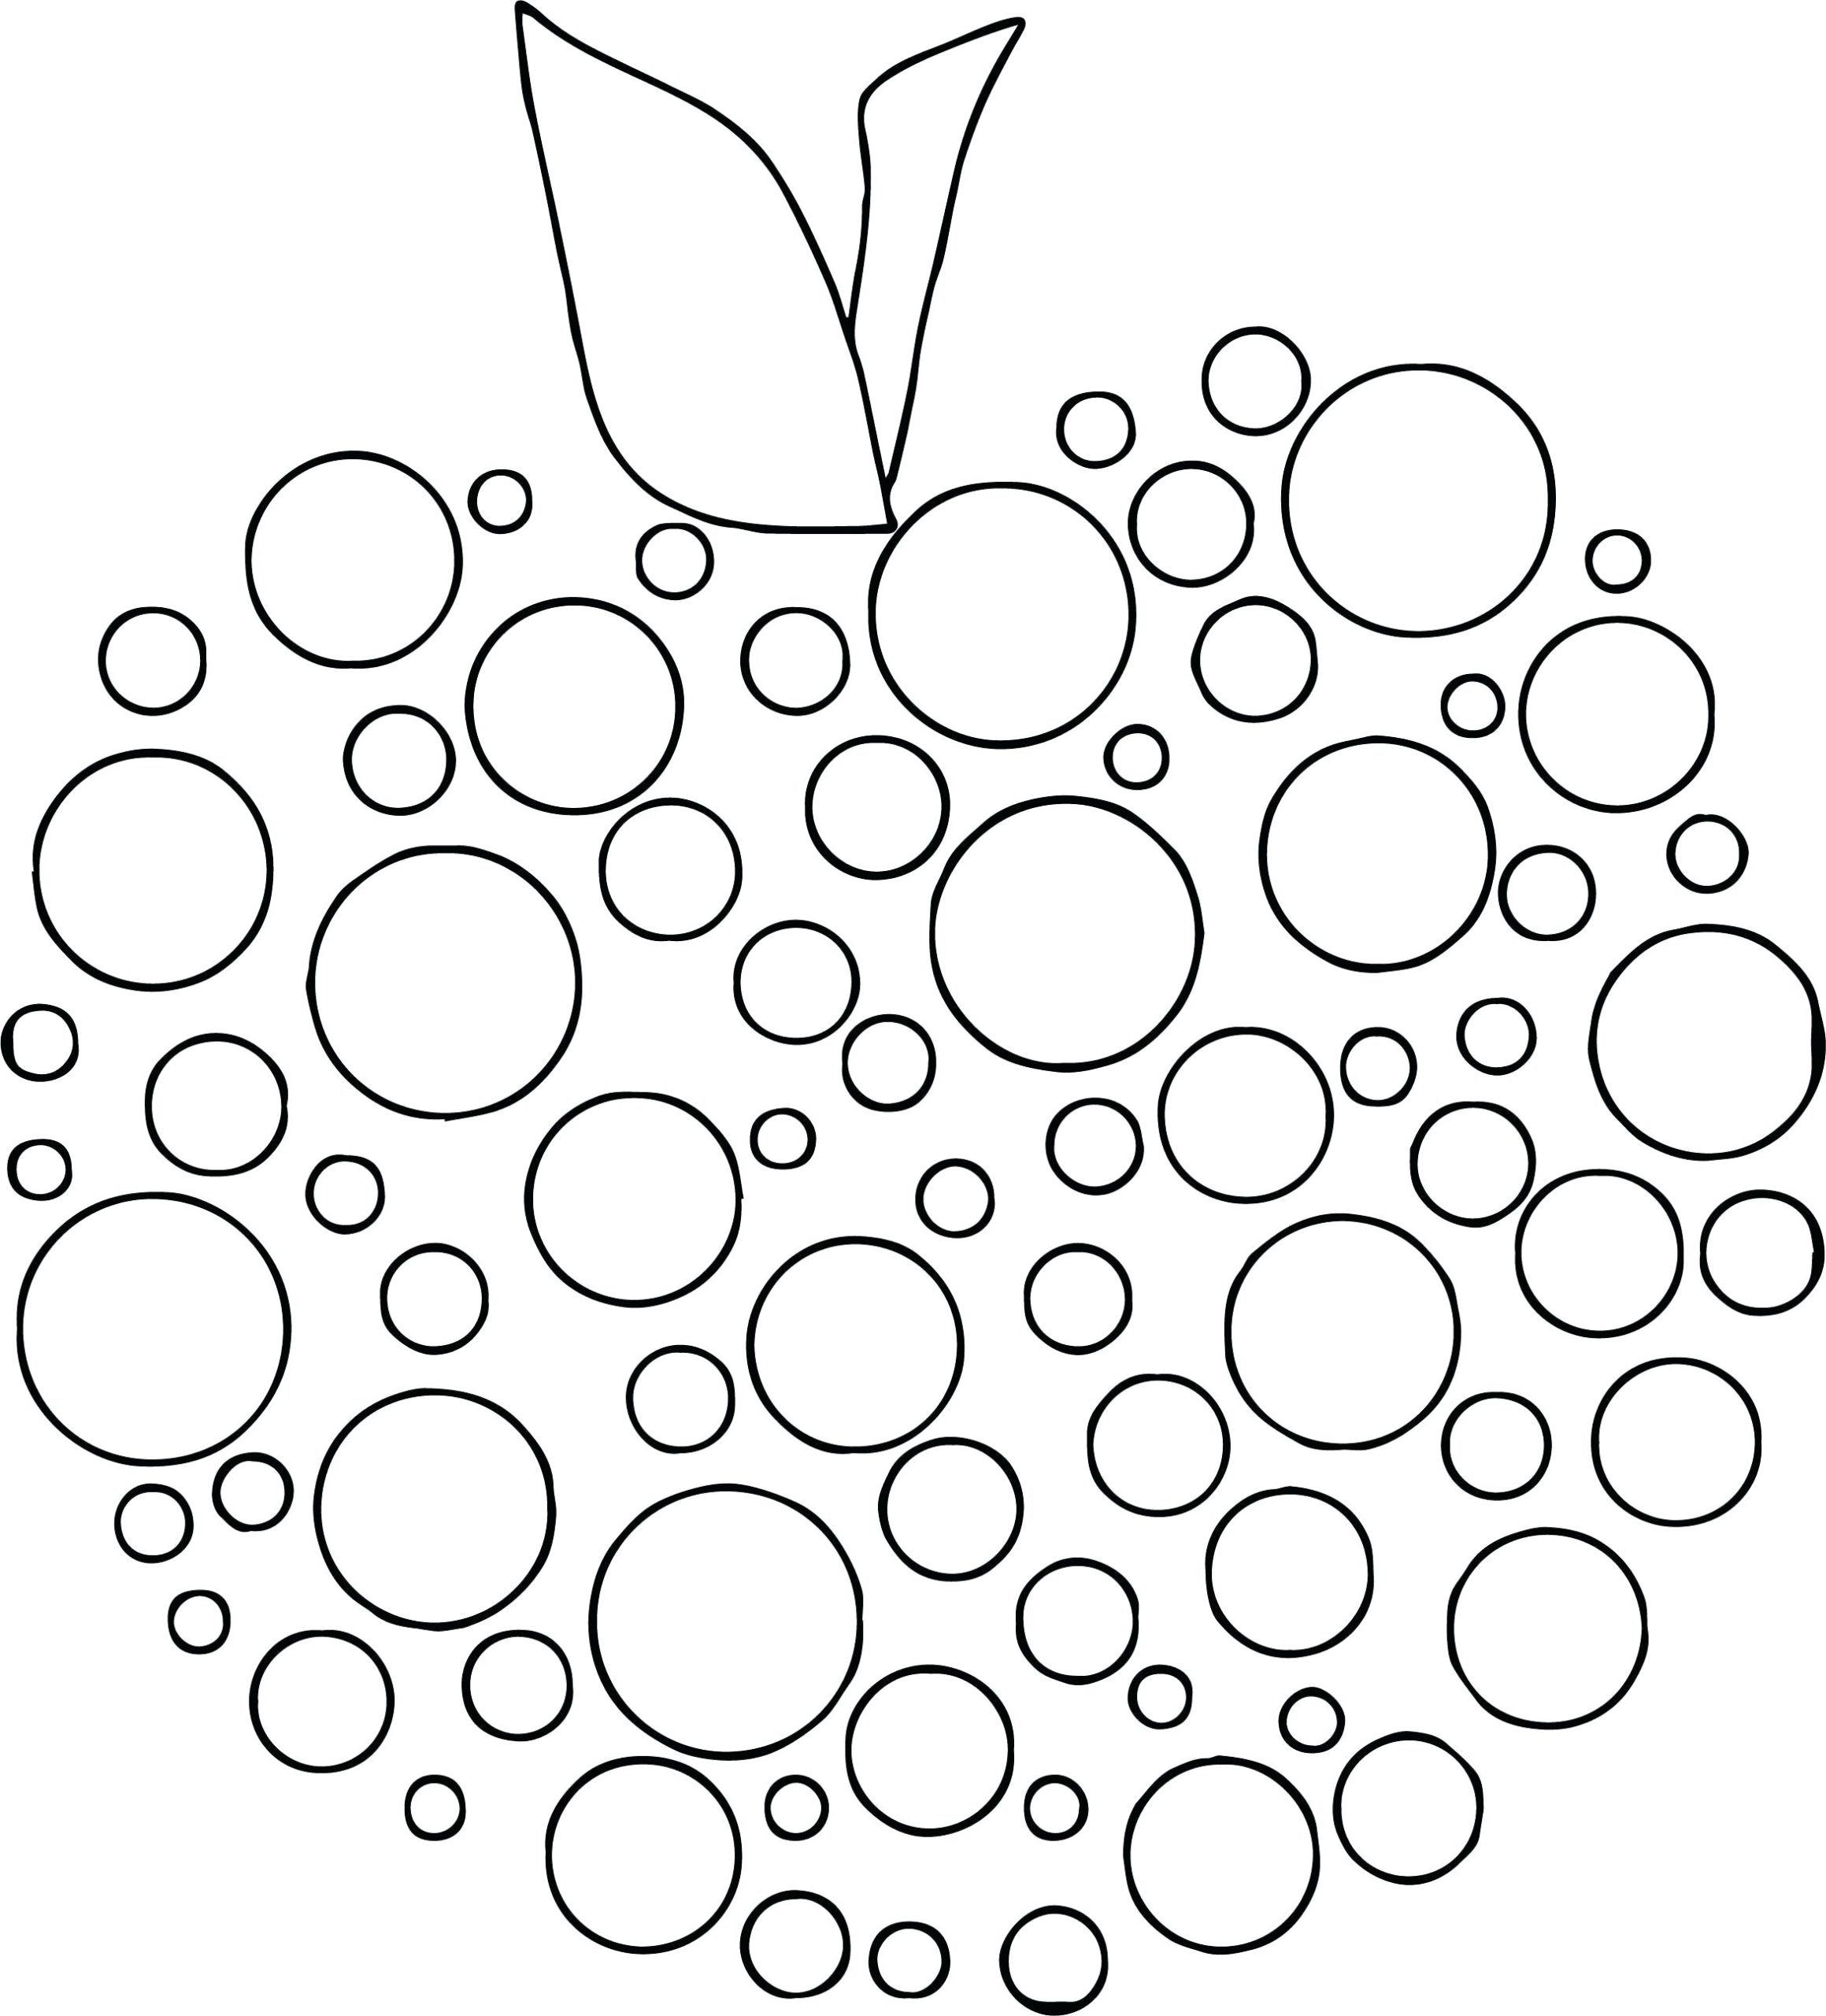 Coloring Book : Coloring Book Pages Awesome Apple Polka ...